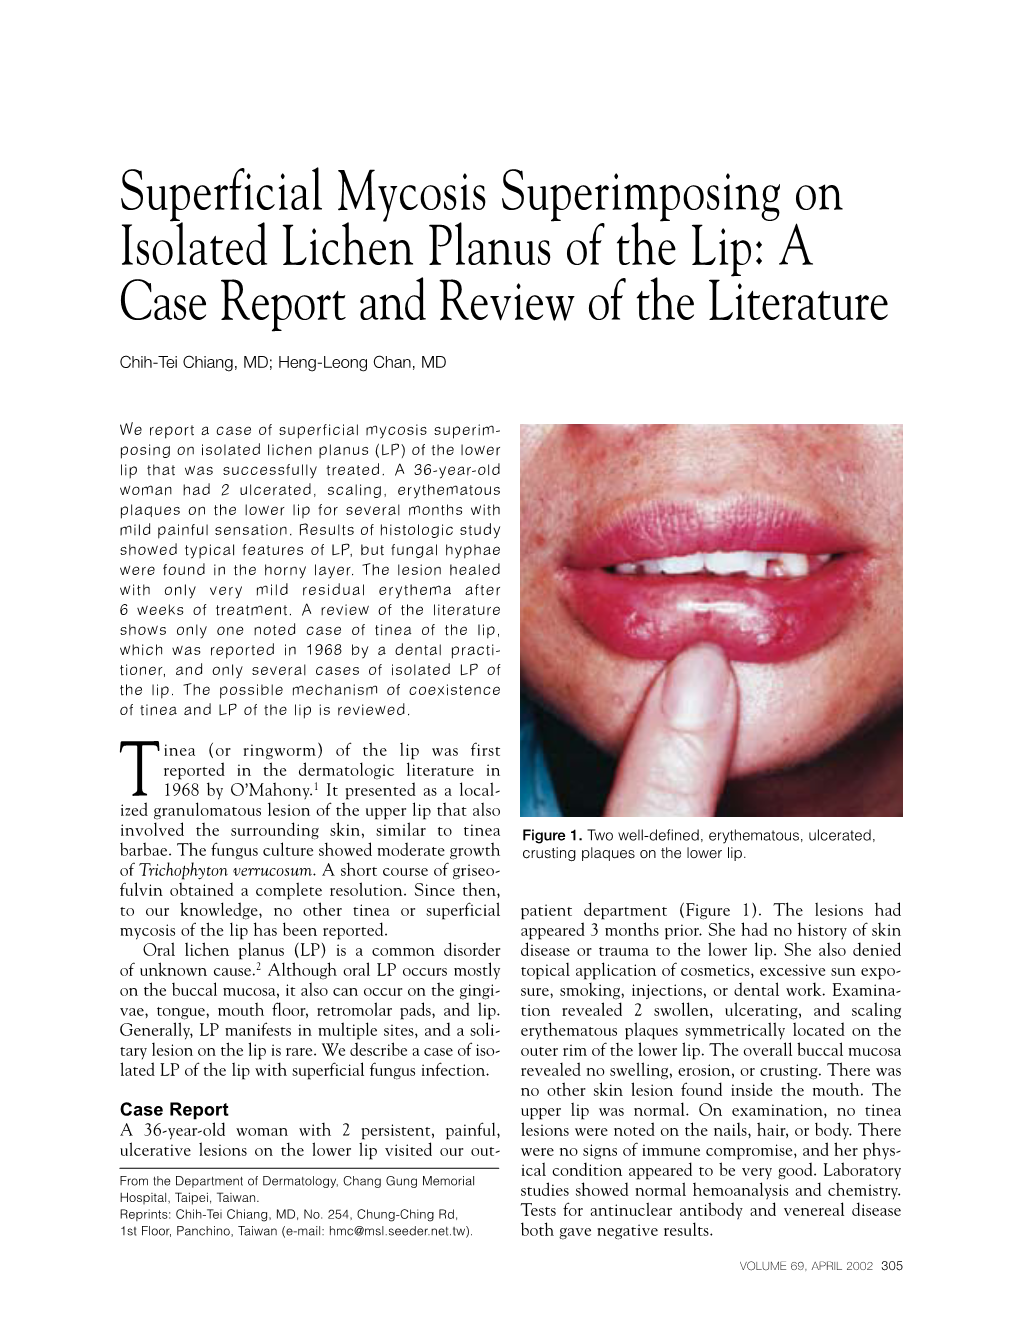 Superficial Mycosis Superimposing on Isolated Lichen Planus of the Lip: a Case Report and Review of the Literature